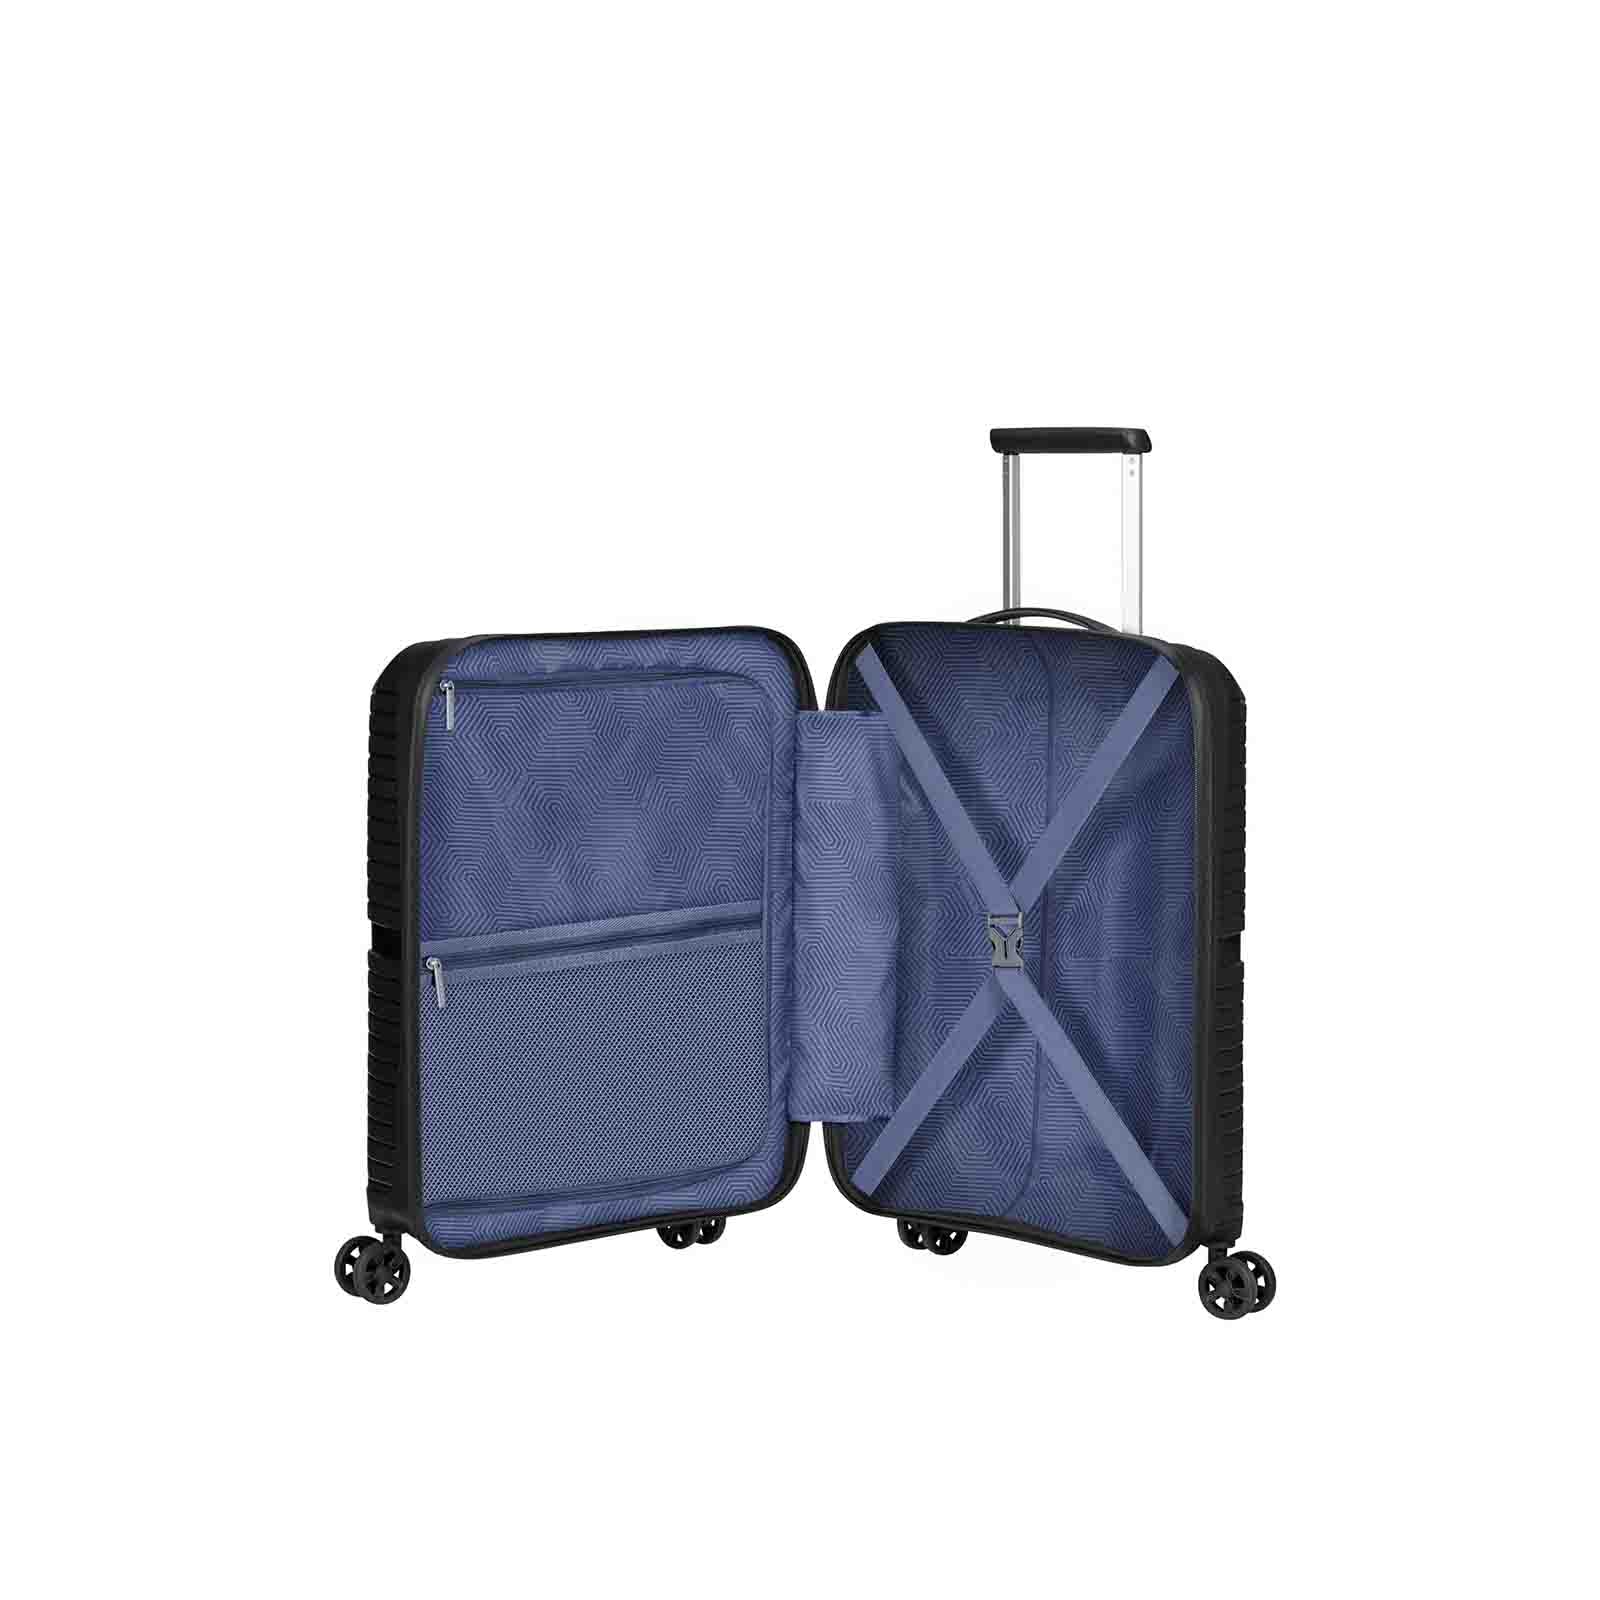 American-Tourister-Airconic-55cm-Suitcase-Front-Opening-Onyx-Black-Open